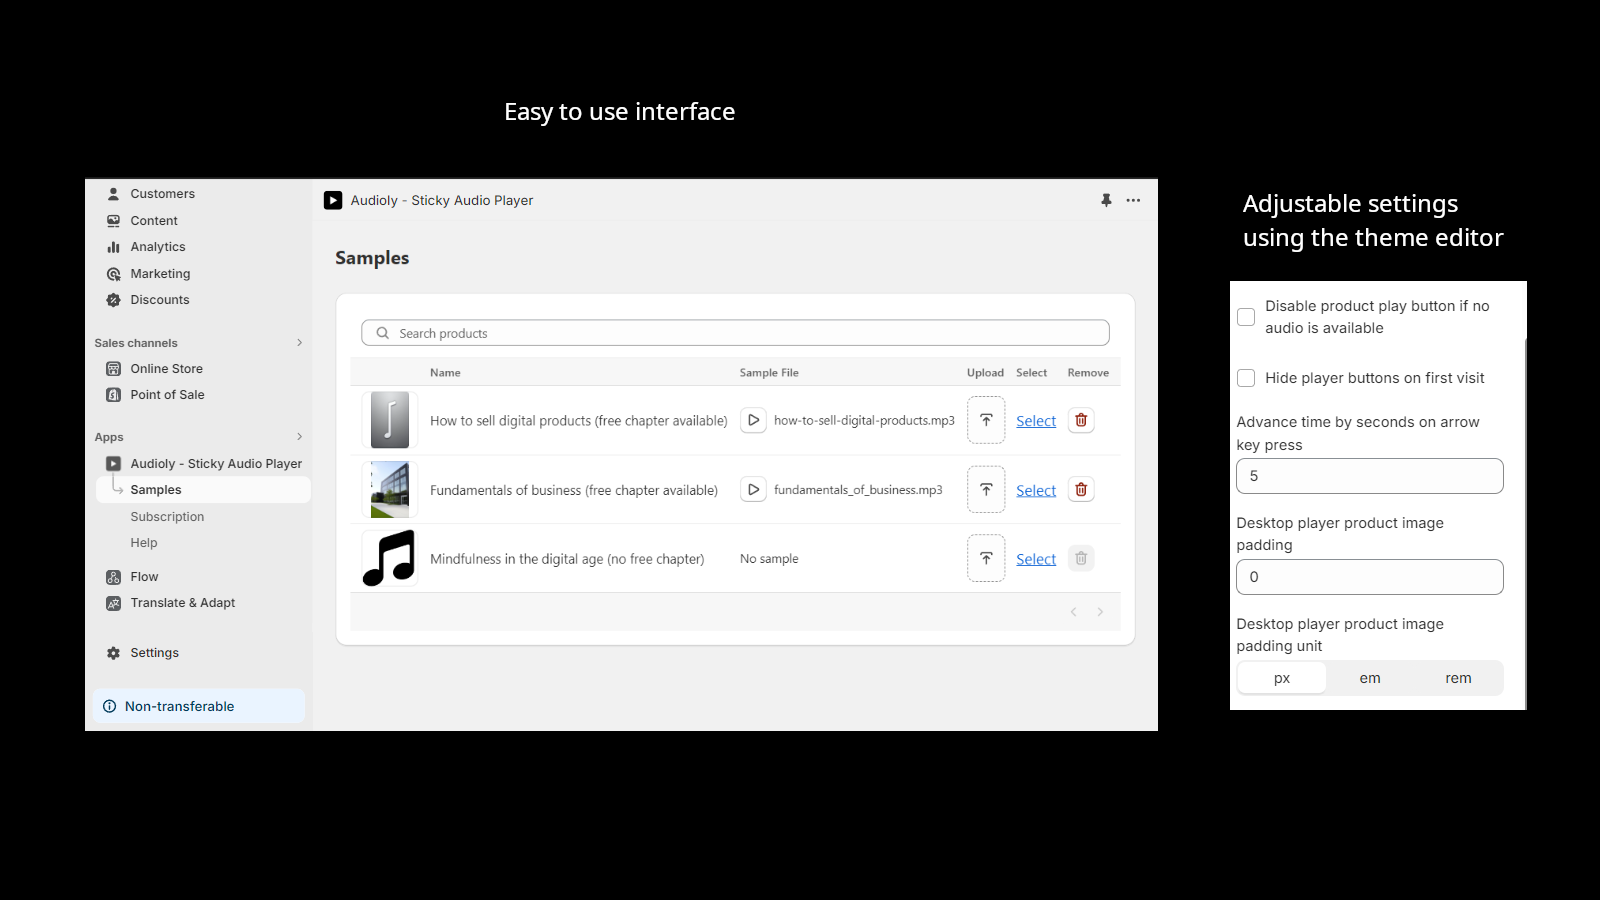 Audio player features